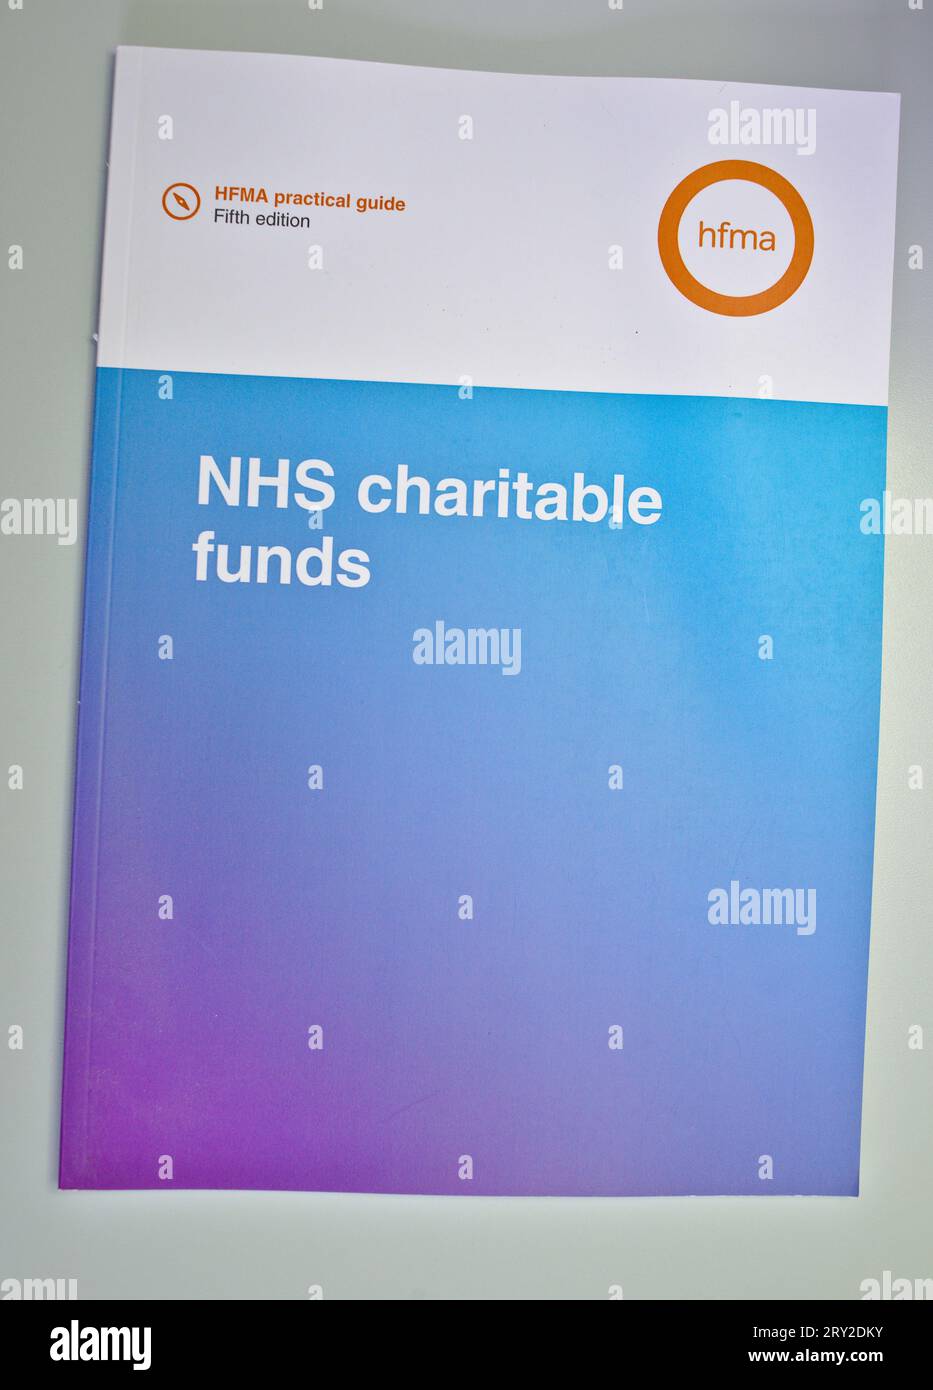 HFMA handbook on NHS charitable funds for finance staff working in healthcare Stock Photo